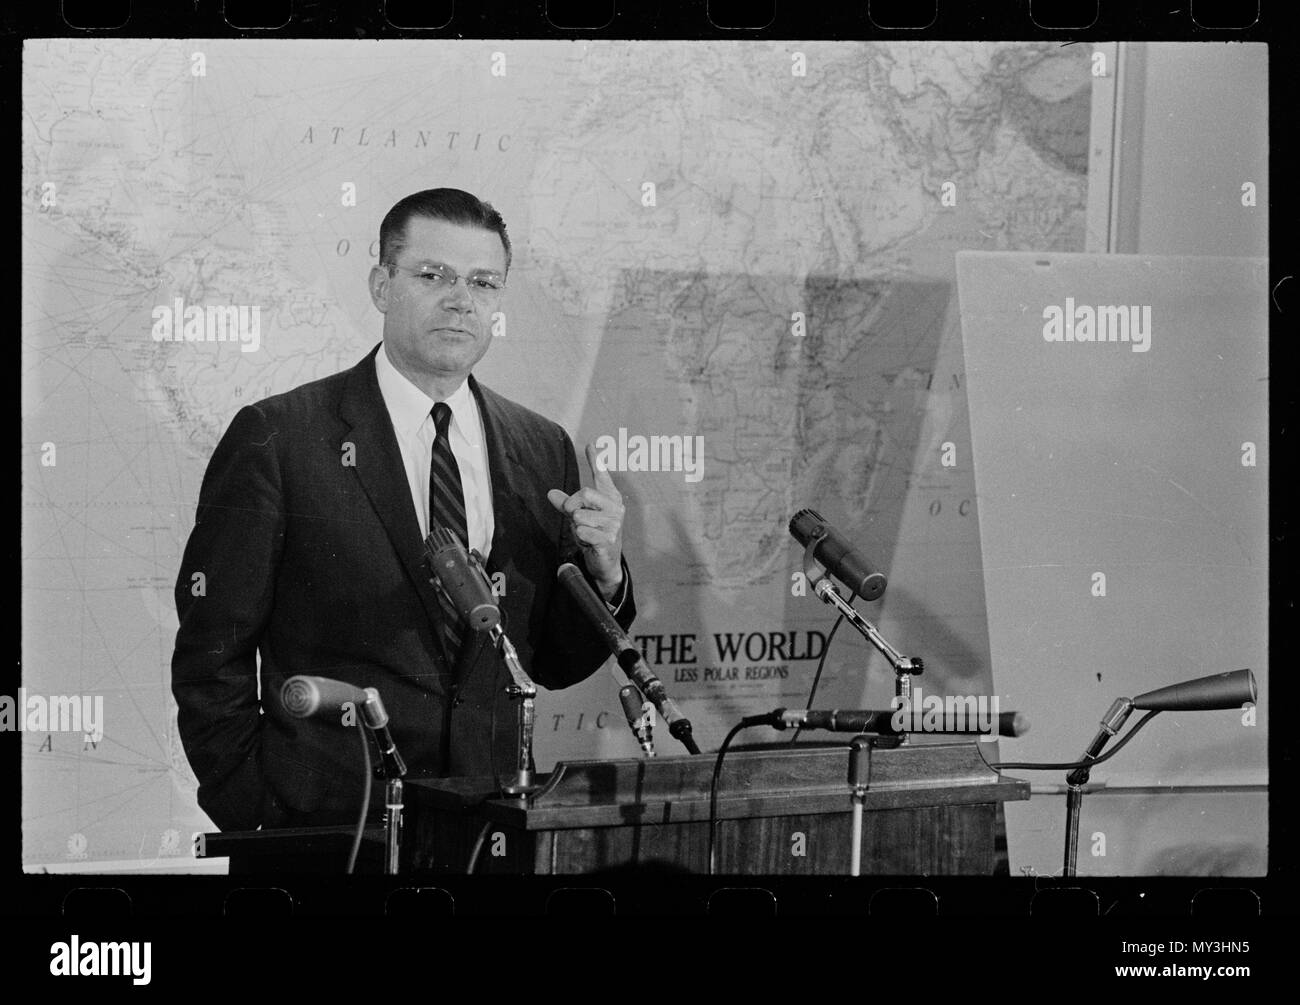 Secretary of Defense Robert McNamara answers questions on the Cuban situation at a press conference, Washington, DC, 10/23/1962. Photo by Marion S. Trikosko. Stock Photo